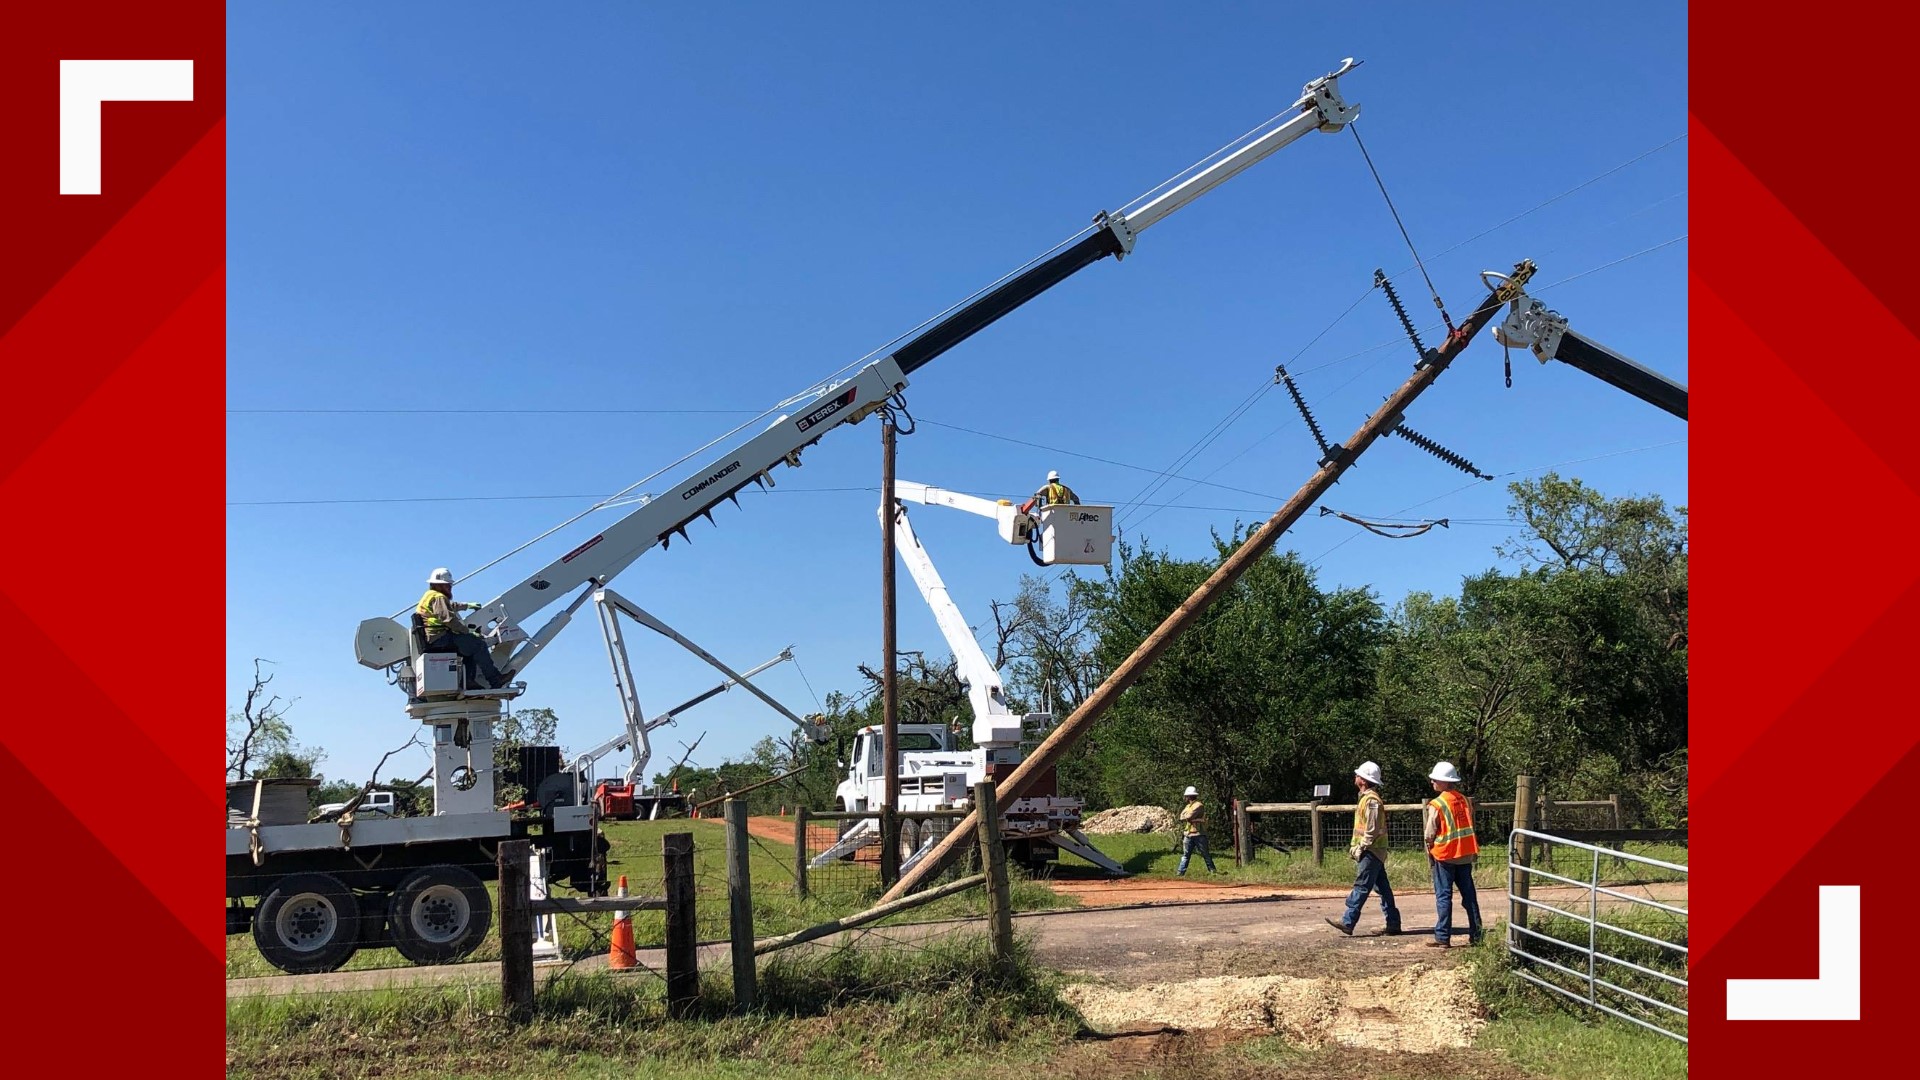 Entergy Texas said the city's power grid will be back up by 8 p.m. Monday, however, it's still up in the air whether the homes will be able to receive that power.